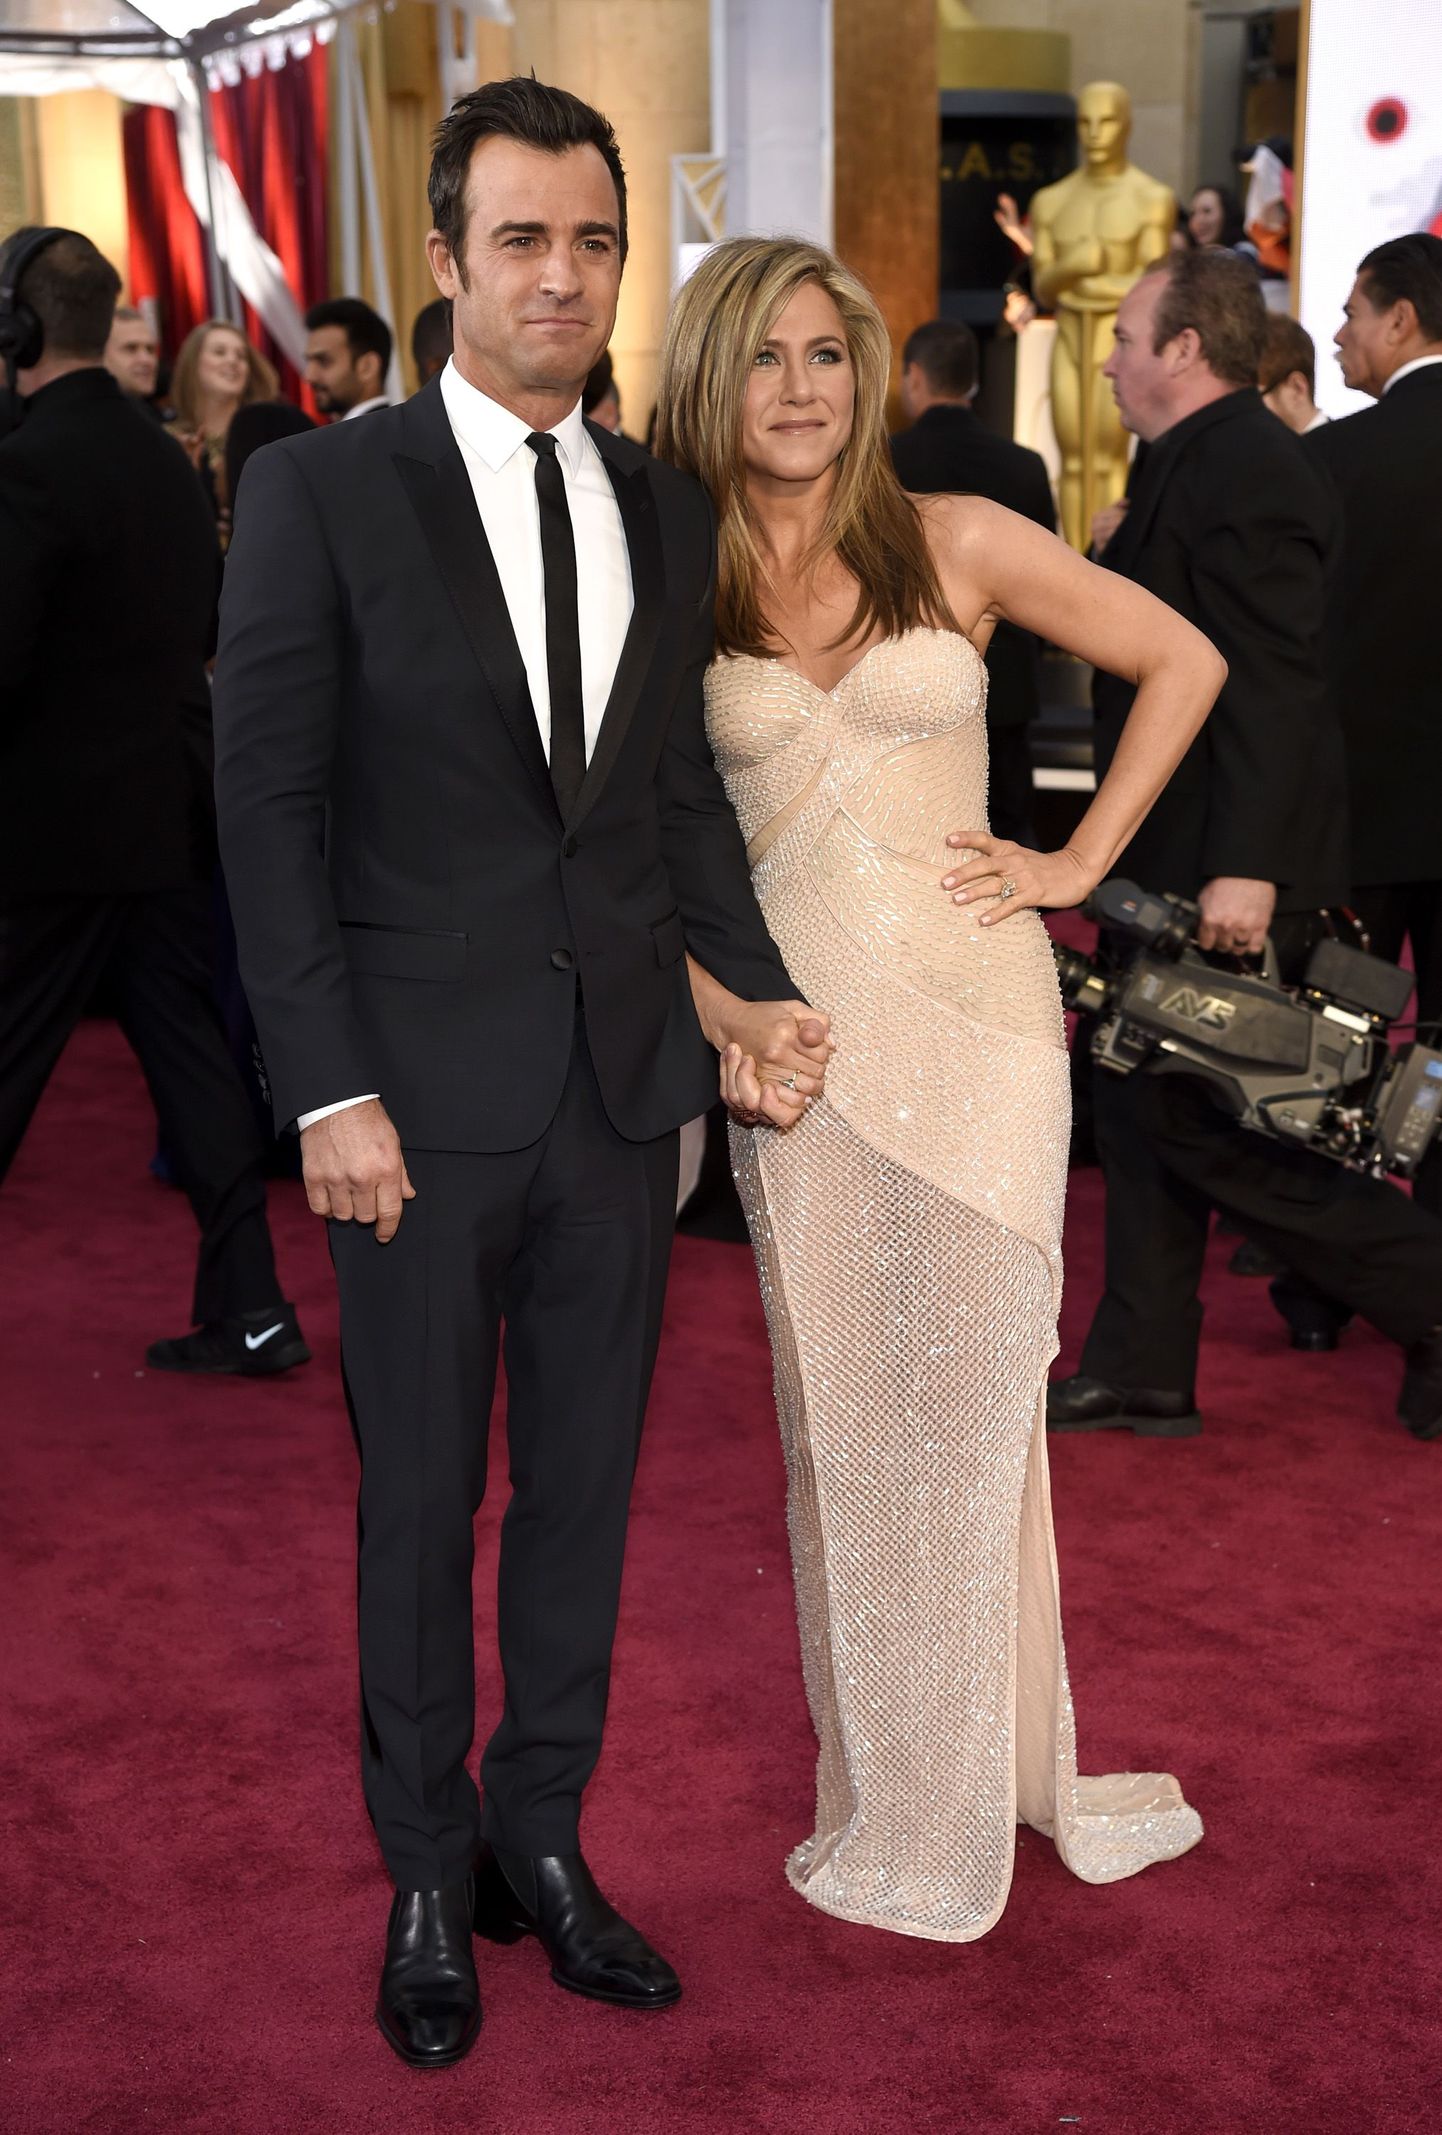 Justin Theroux, left, and Jennifer Aniston arrive at the Oscars on Sunday, Feb. 22, 2015, at the Dolby Theatre in Los Angeles. (Photo by Chris Pizzello/Invision/AP)